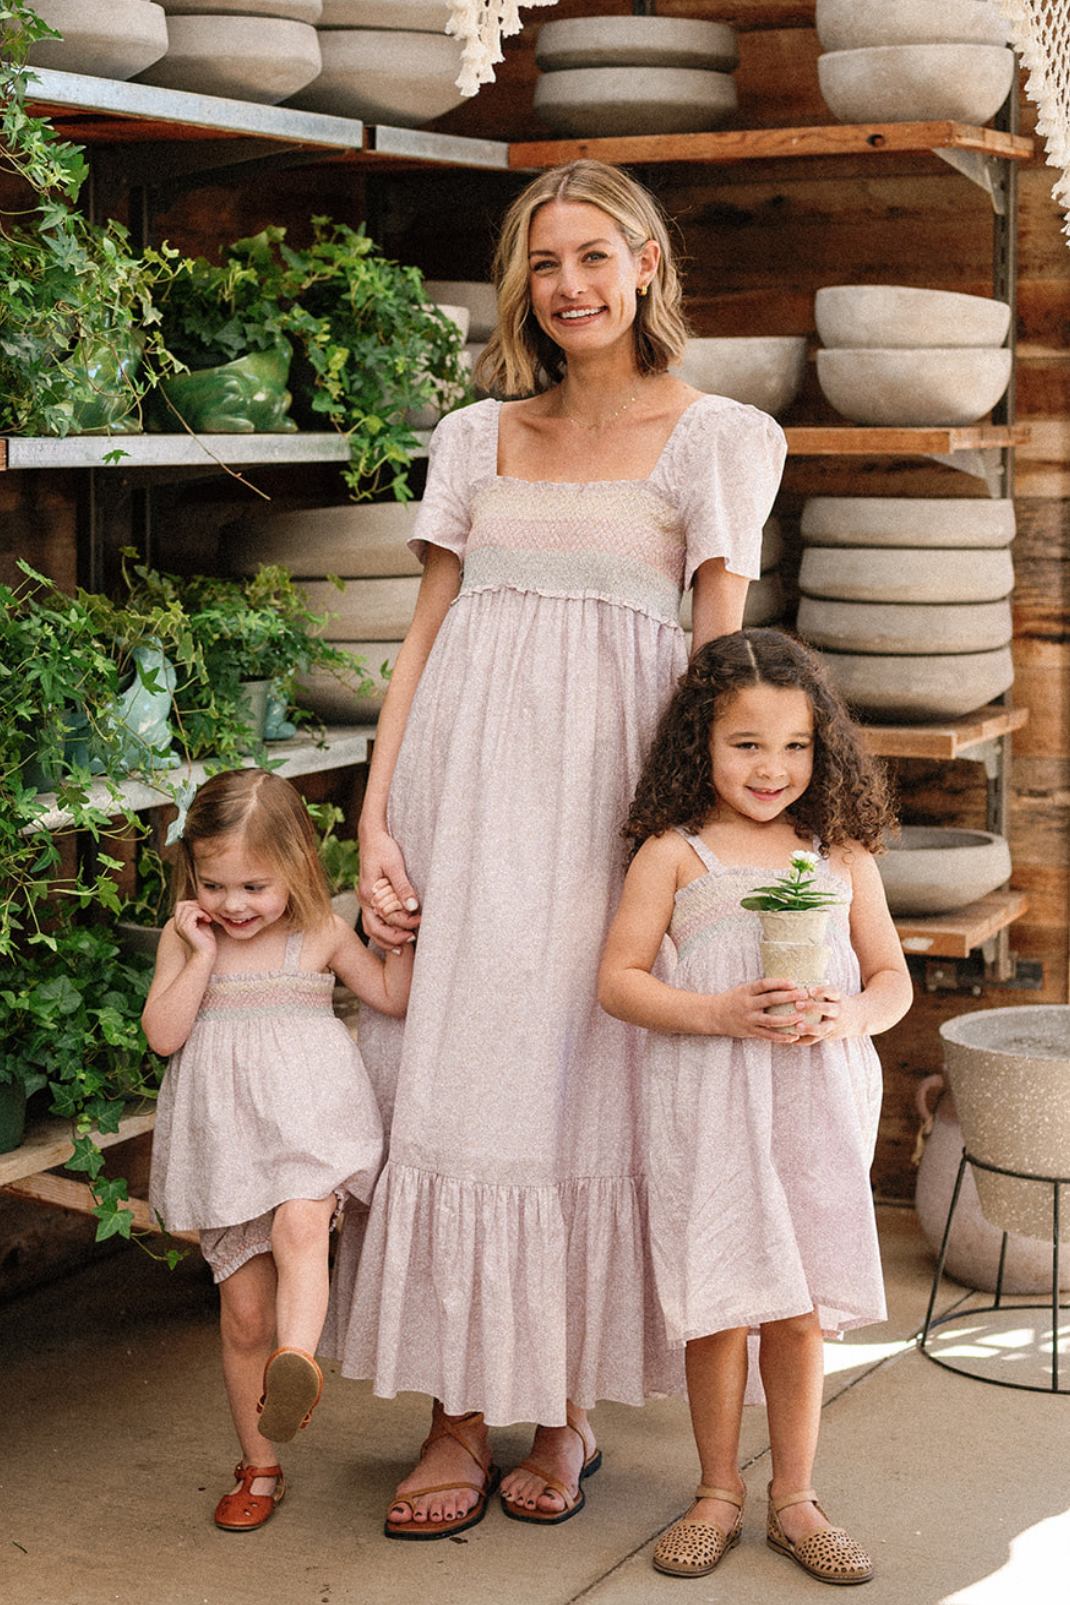 Lifestyle shot of a mother and her two daughters all wearing pieces in the Scattered Blooms print